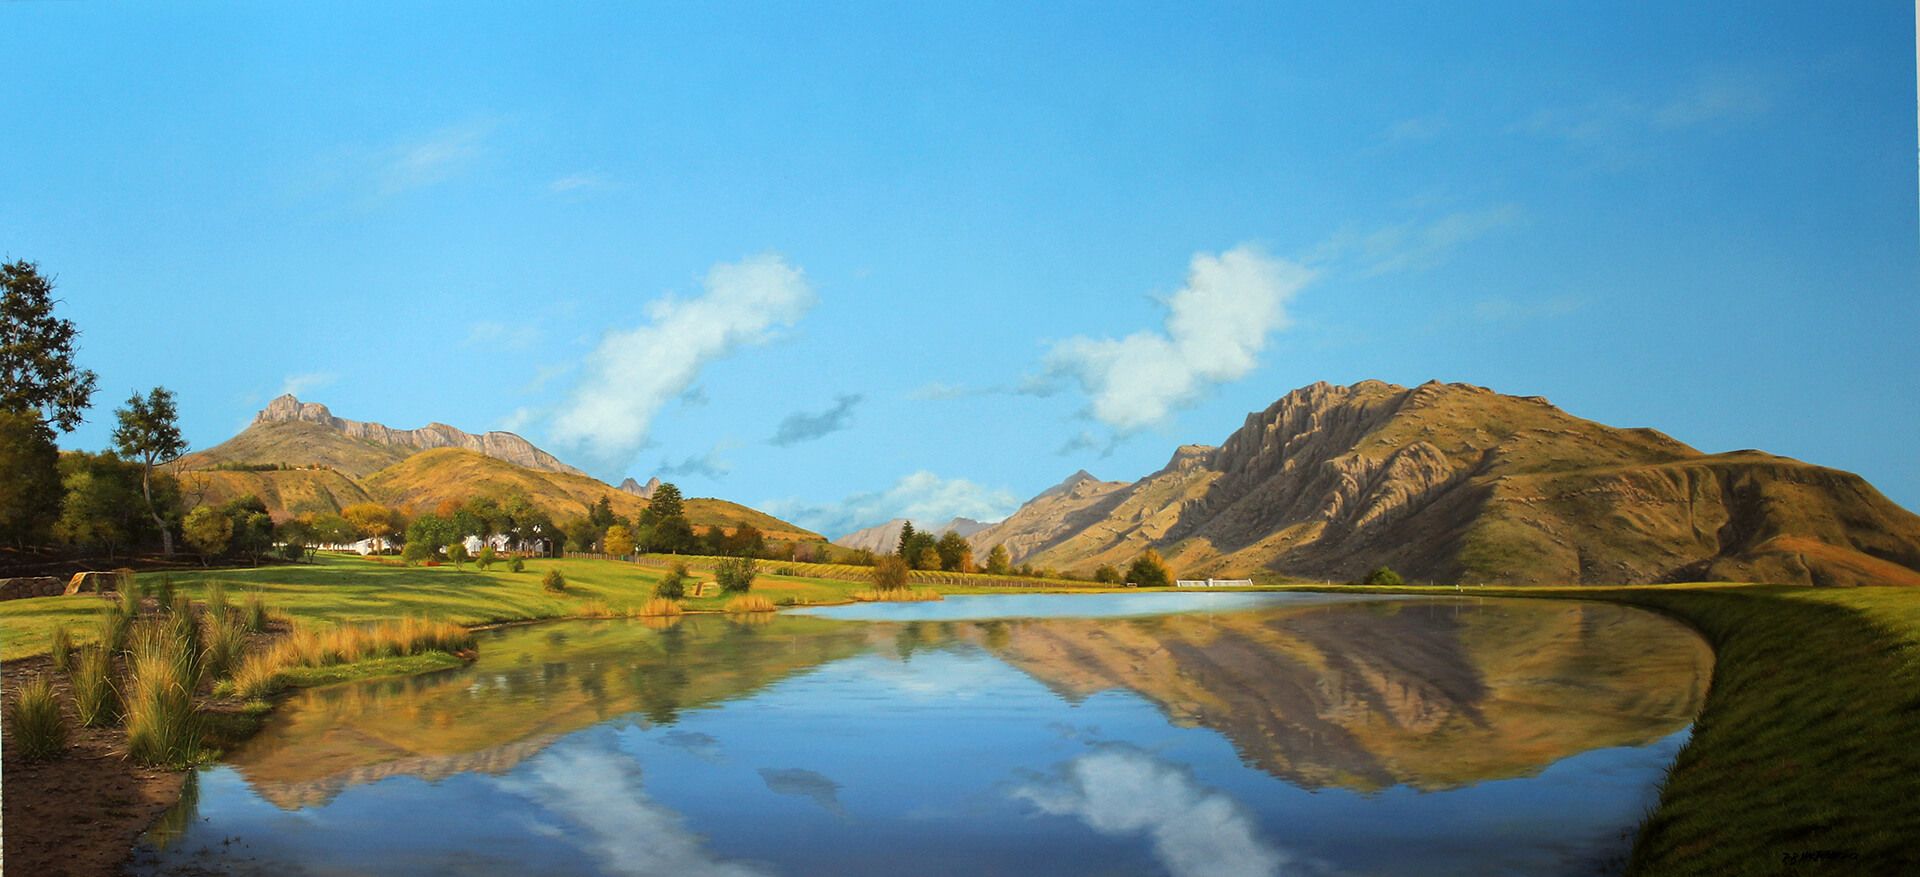 Photorealistic painting of mountains mirrored by a lake